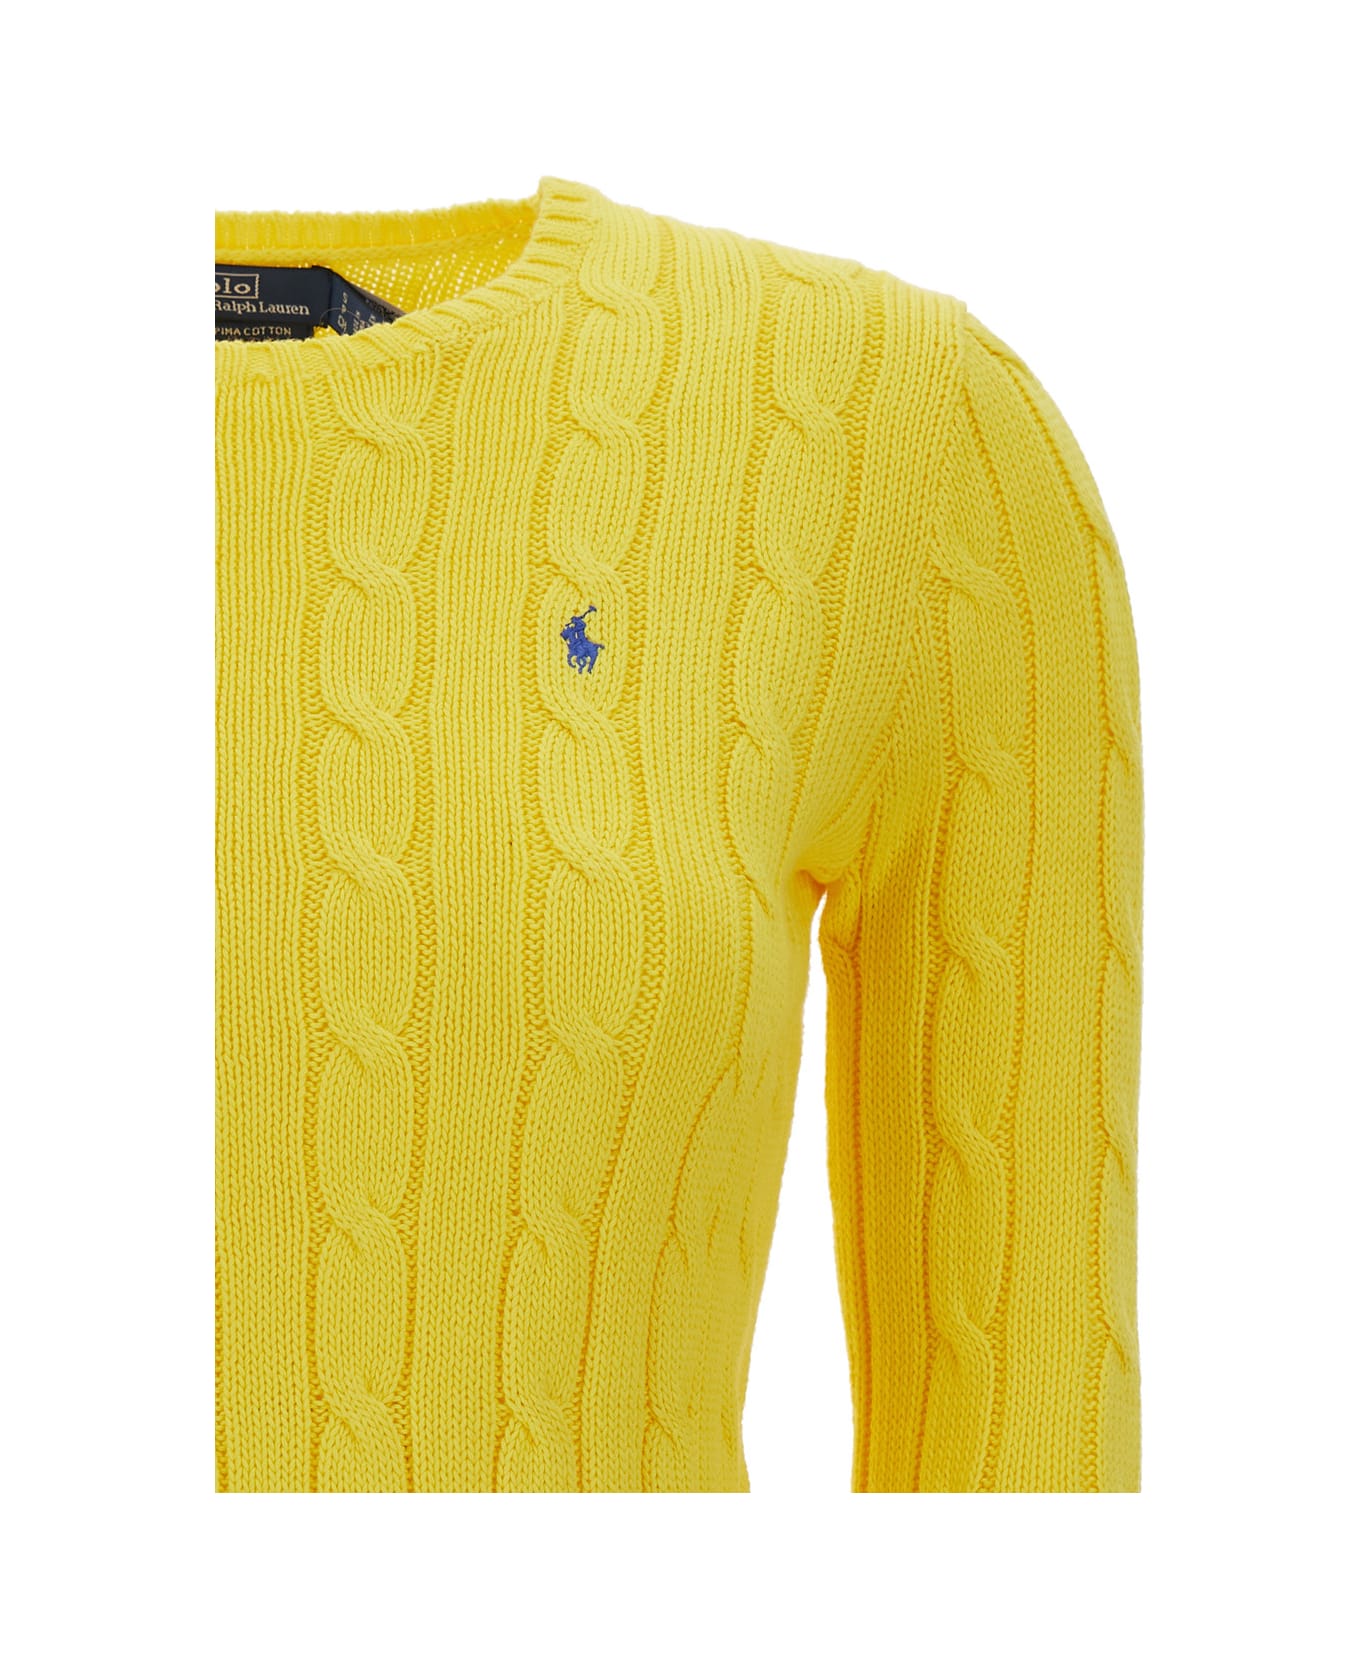 Polo Ralph Lauren Yellow Tight Fit Crew Neck Sweater In Cotton Woman - Yellow